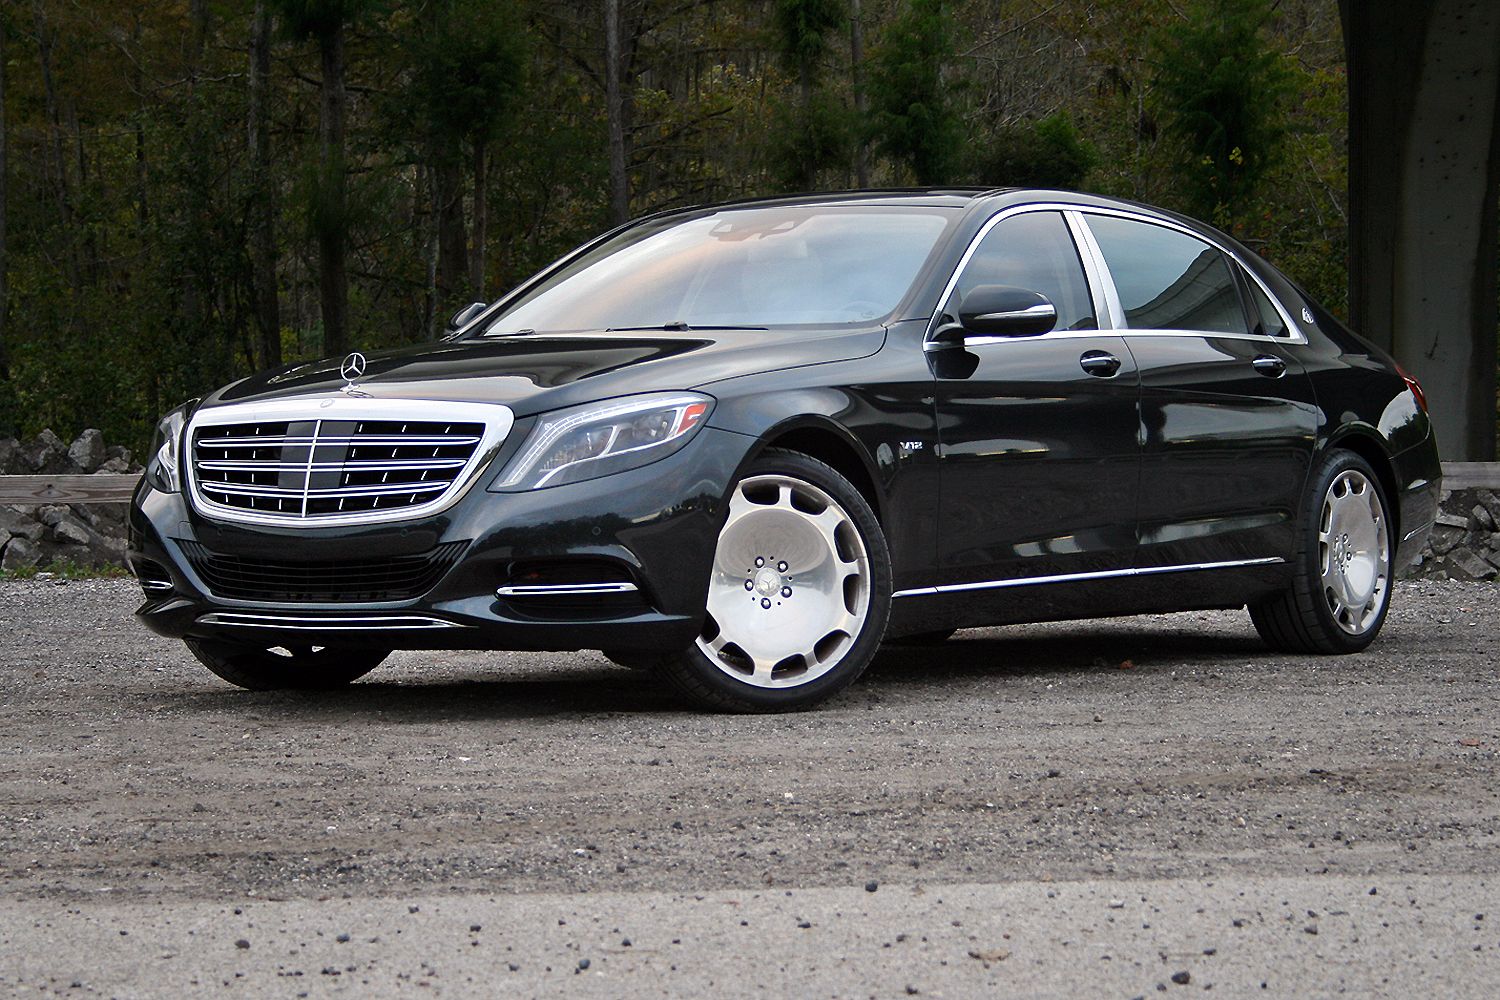 Mercedes-Maybach S600 parked out on the road